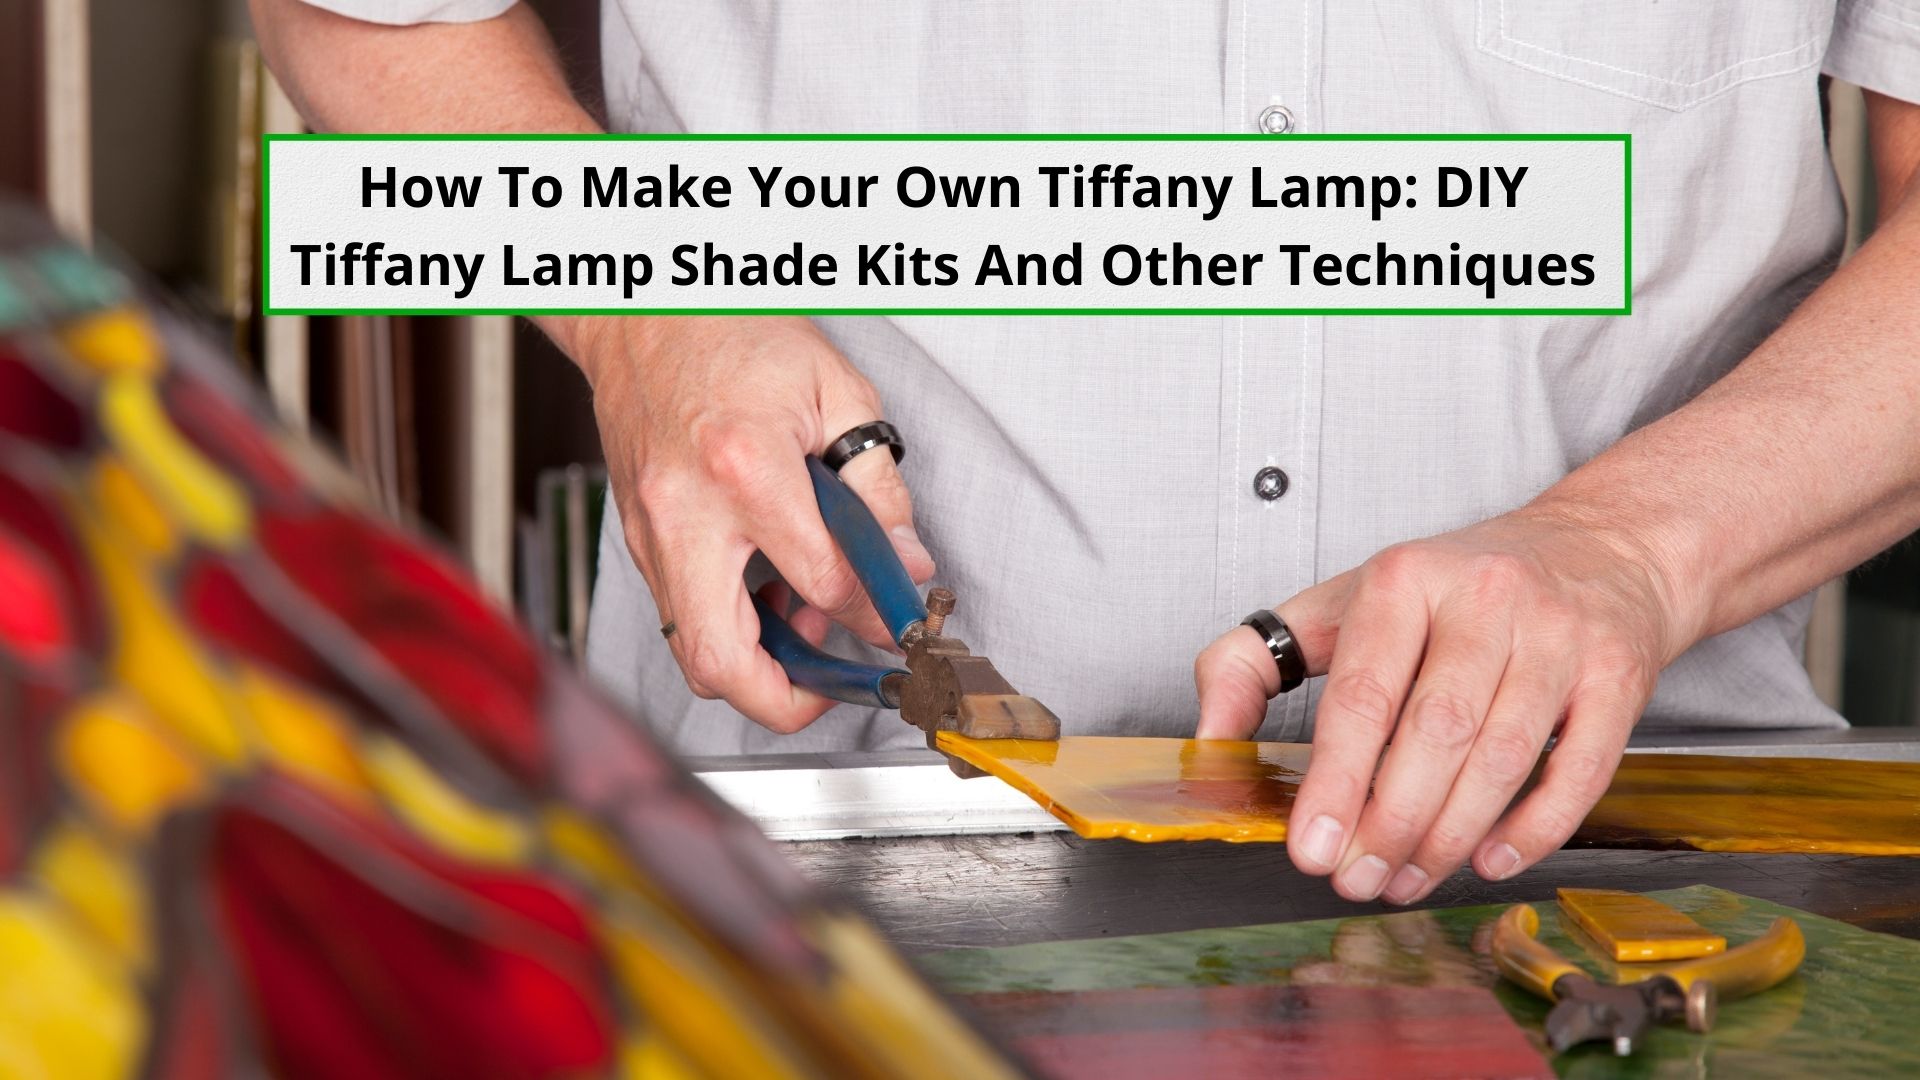 Image depicting a person cutting colored glass on a workbench for a Tiffany Lamp Shade shown to the left of image.